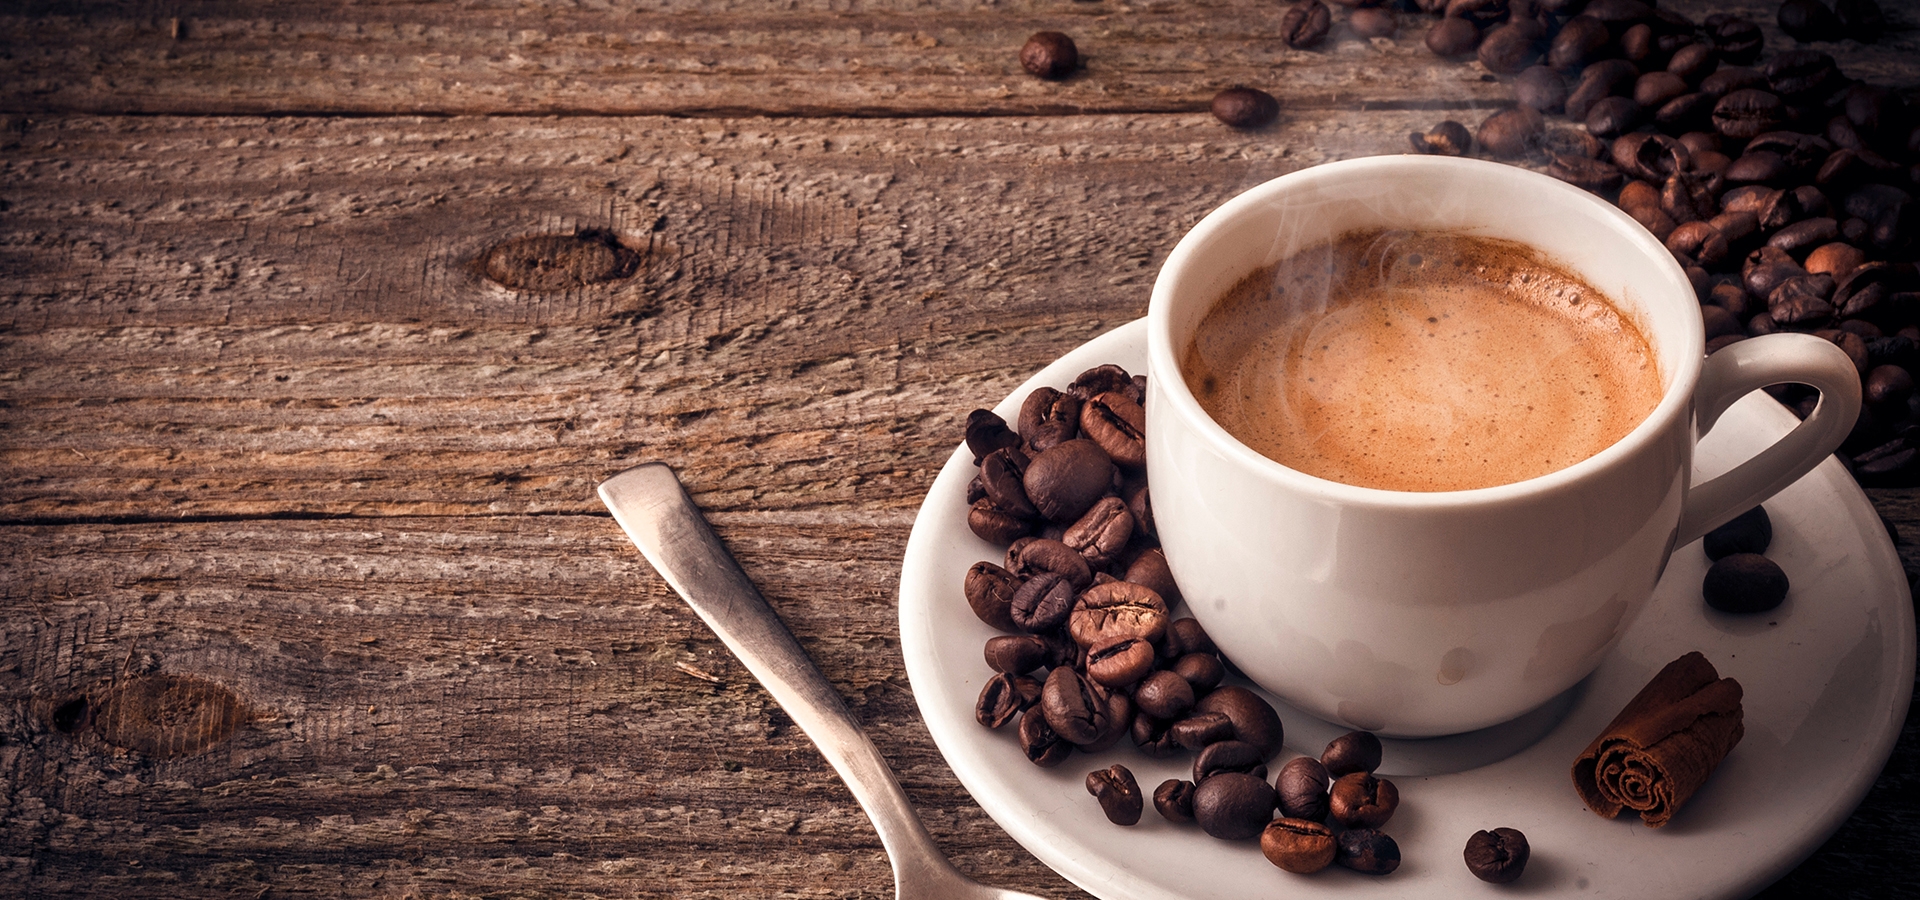 Reminder Coffee Morning at The Centre on 1st November 2022 | Cambridge Cancer Help Centre